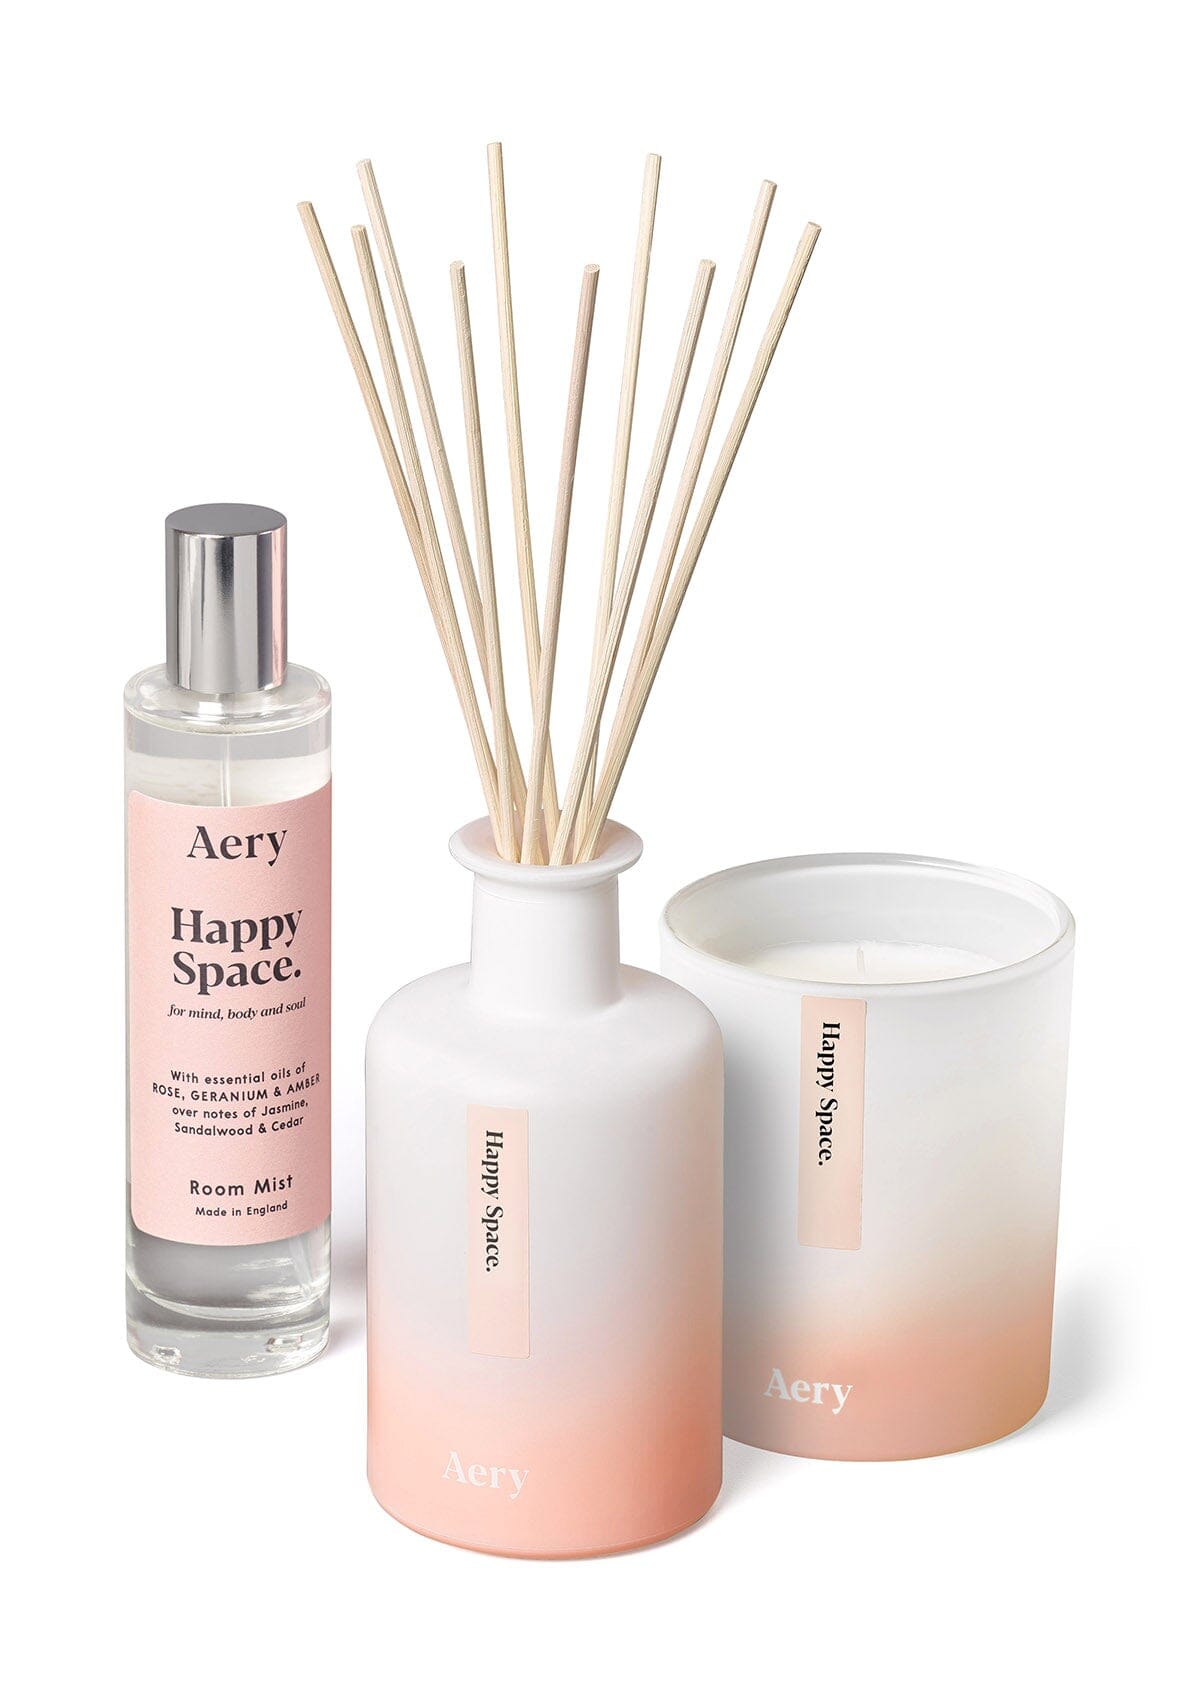 Pink happy space bundle of diffuser candle and room mist by aery displayed on white background 